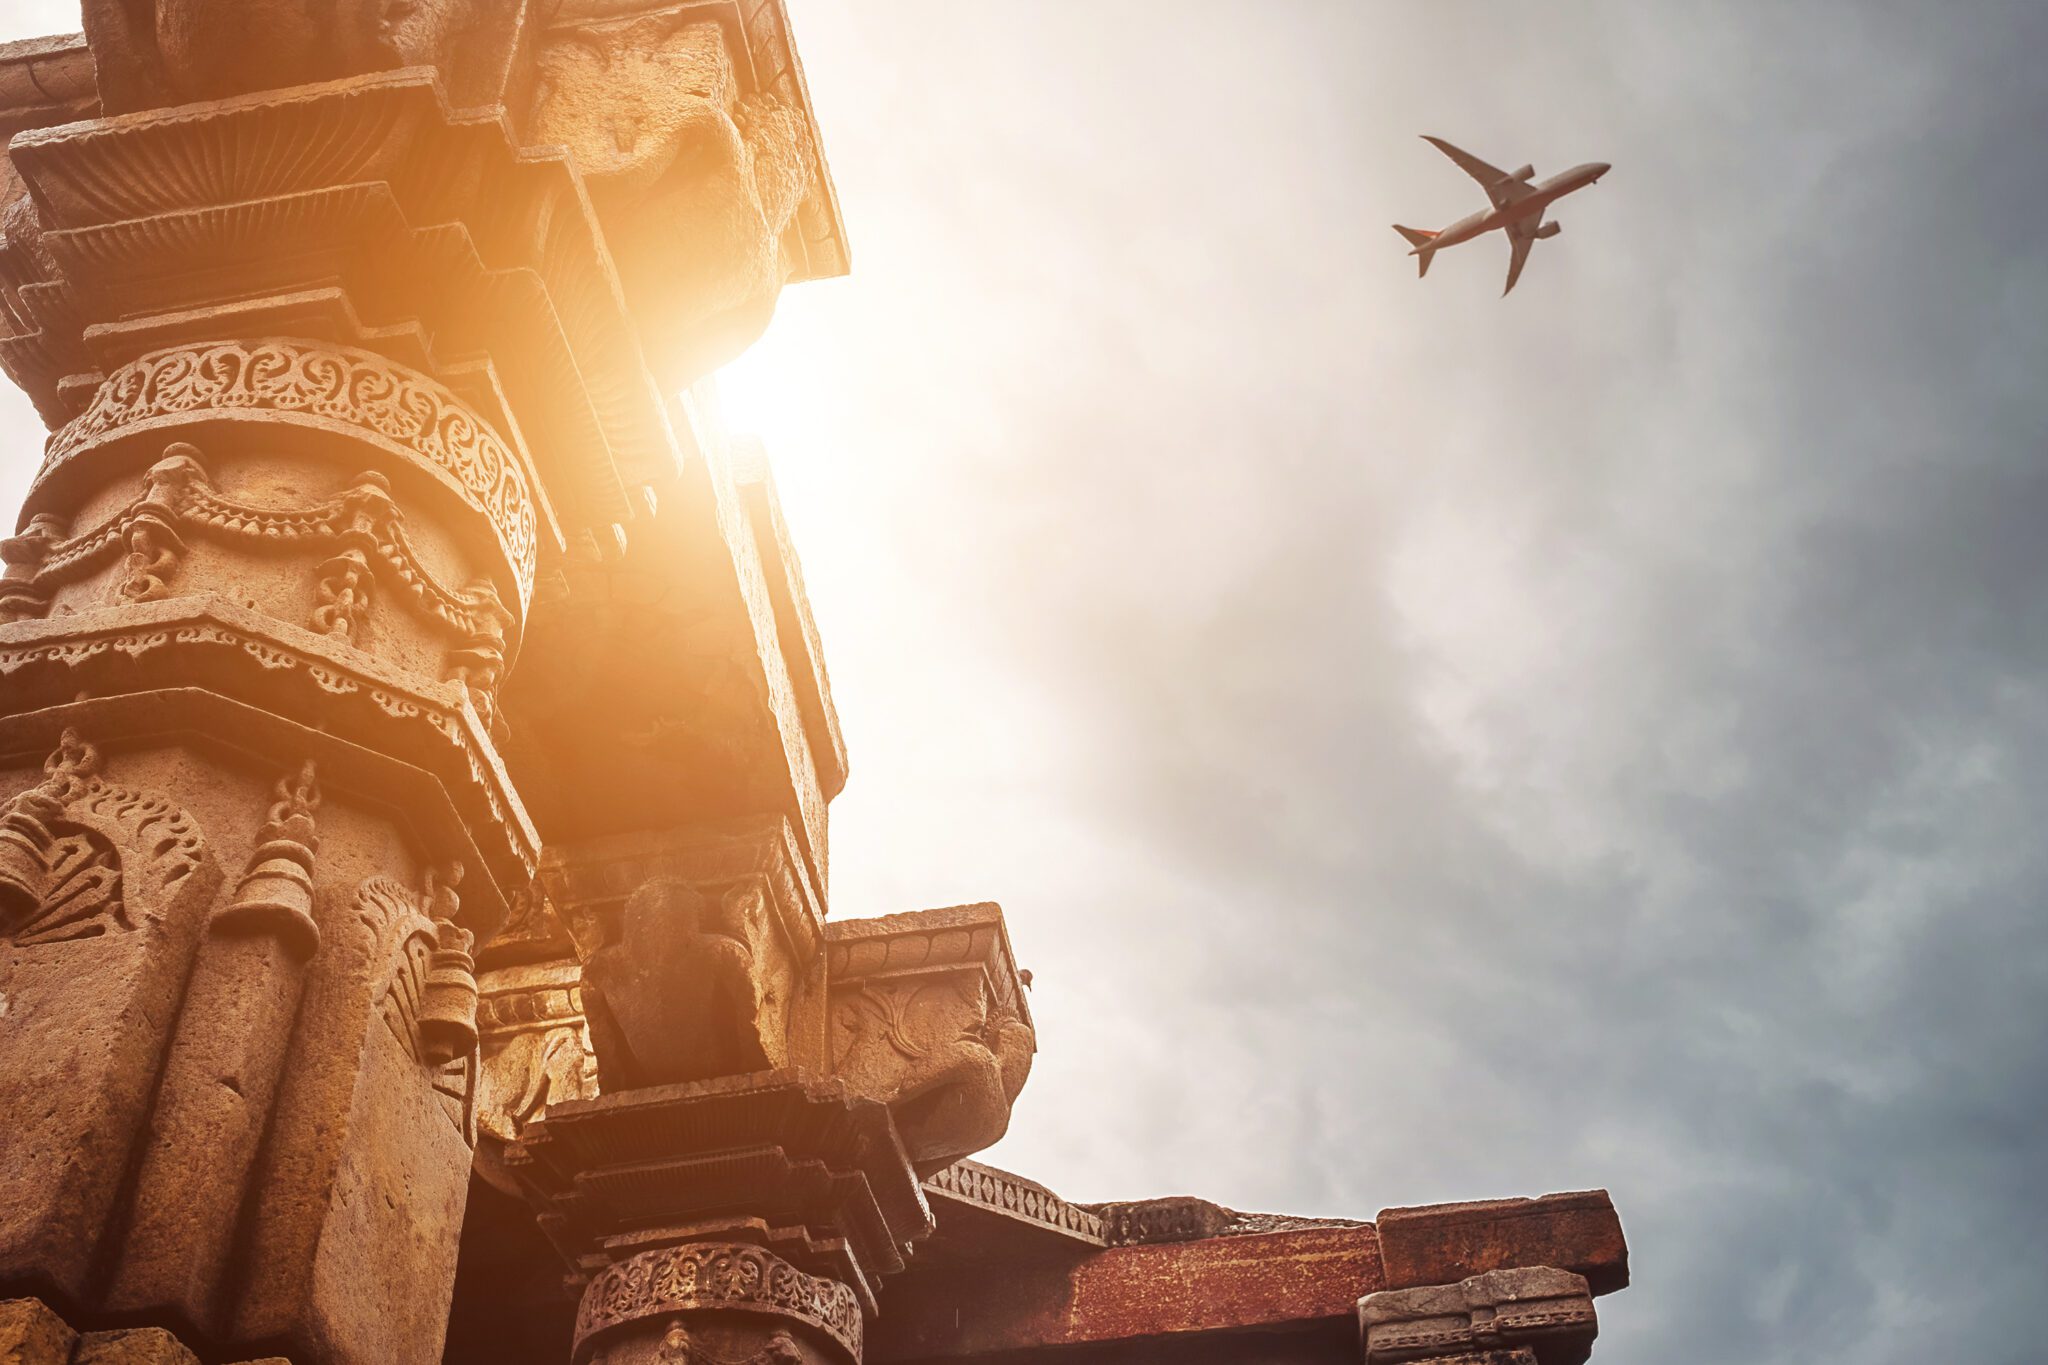 Metasearch engines have emerged as the leading channel for travel bookings post-Covid.